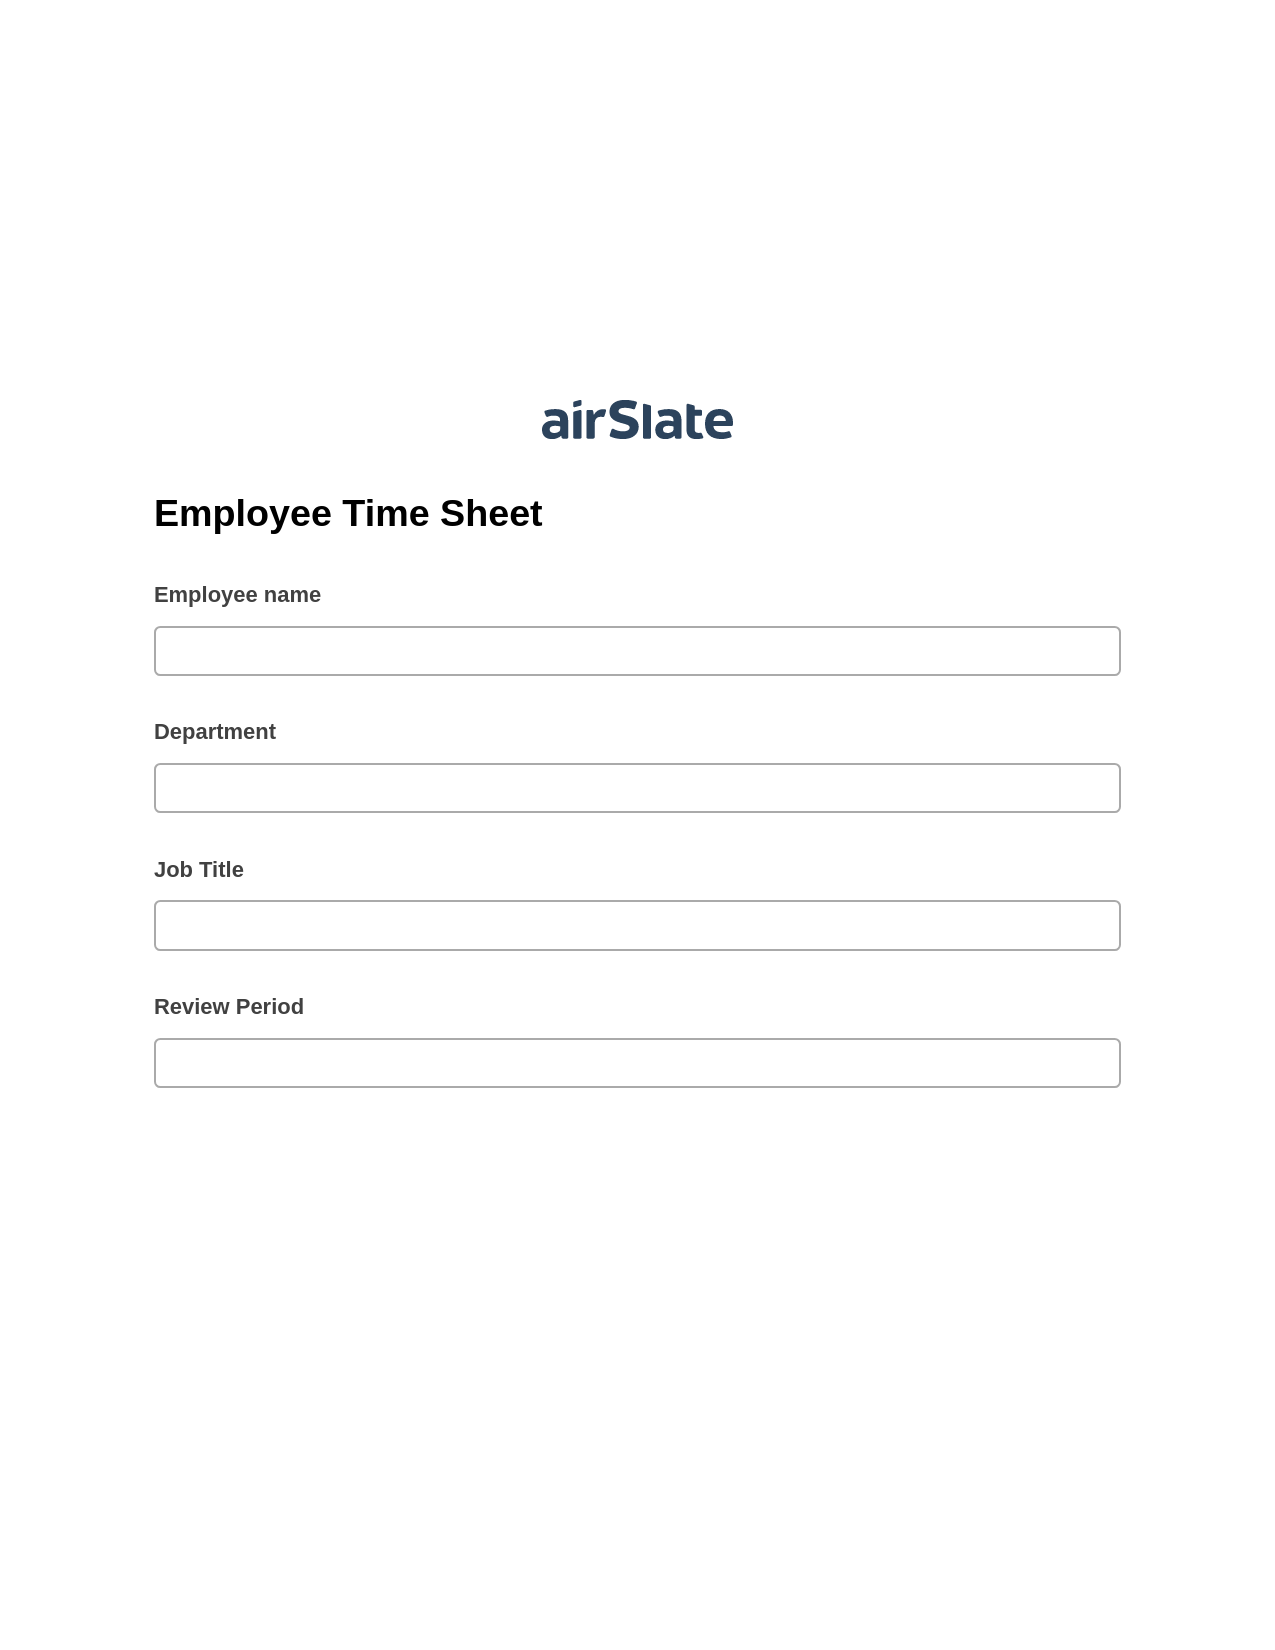 Multirole Employee Time Sheet Pre-fill from MySQL Bot, Email Notification Bot, Archive to SharePoint Folder Bot